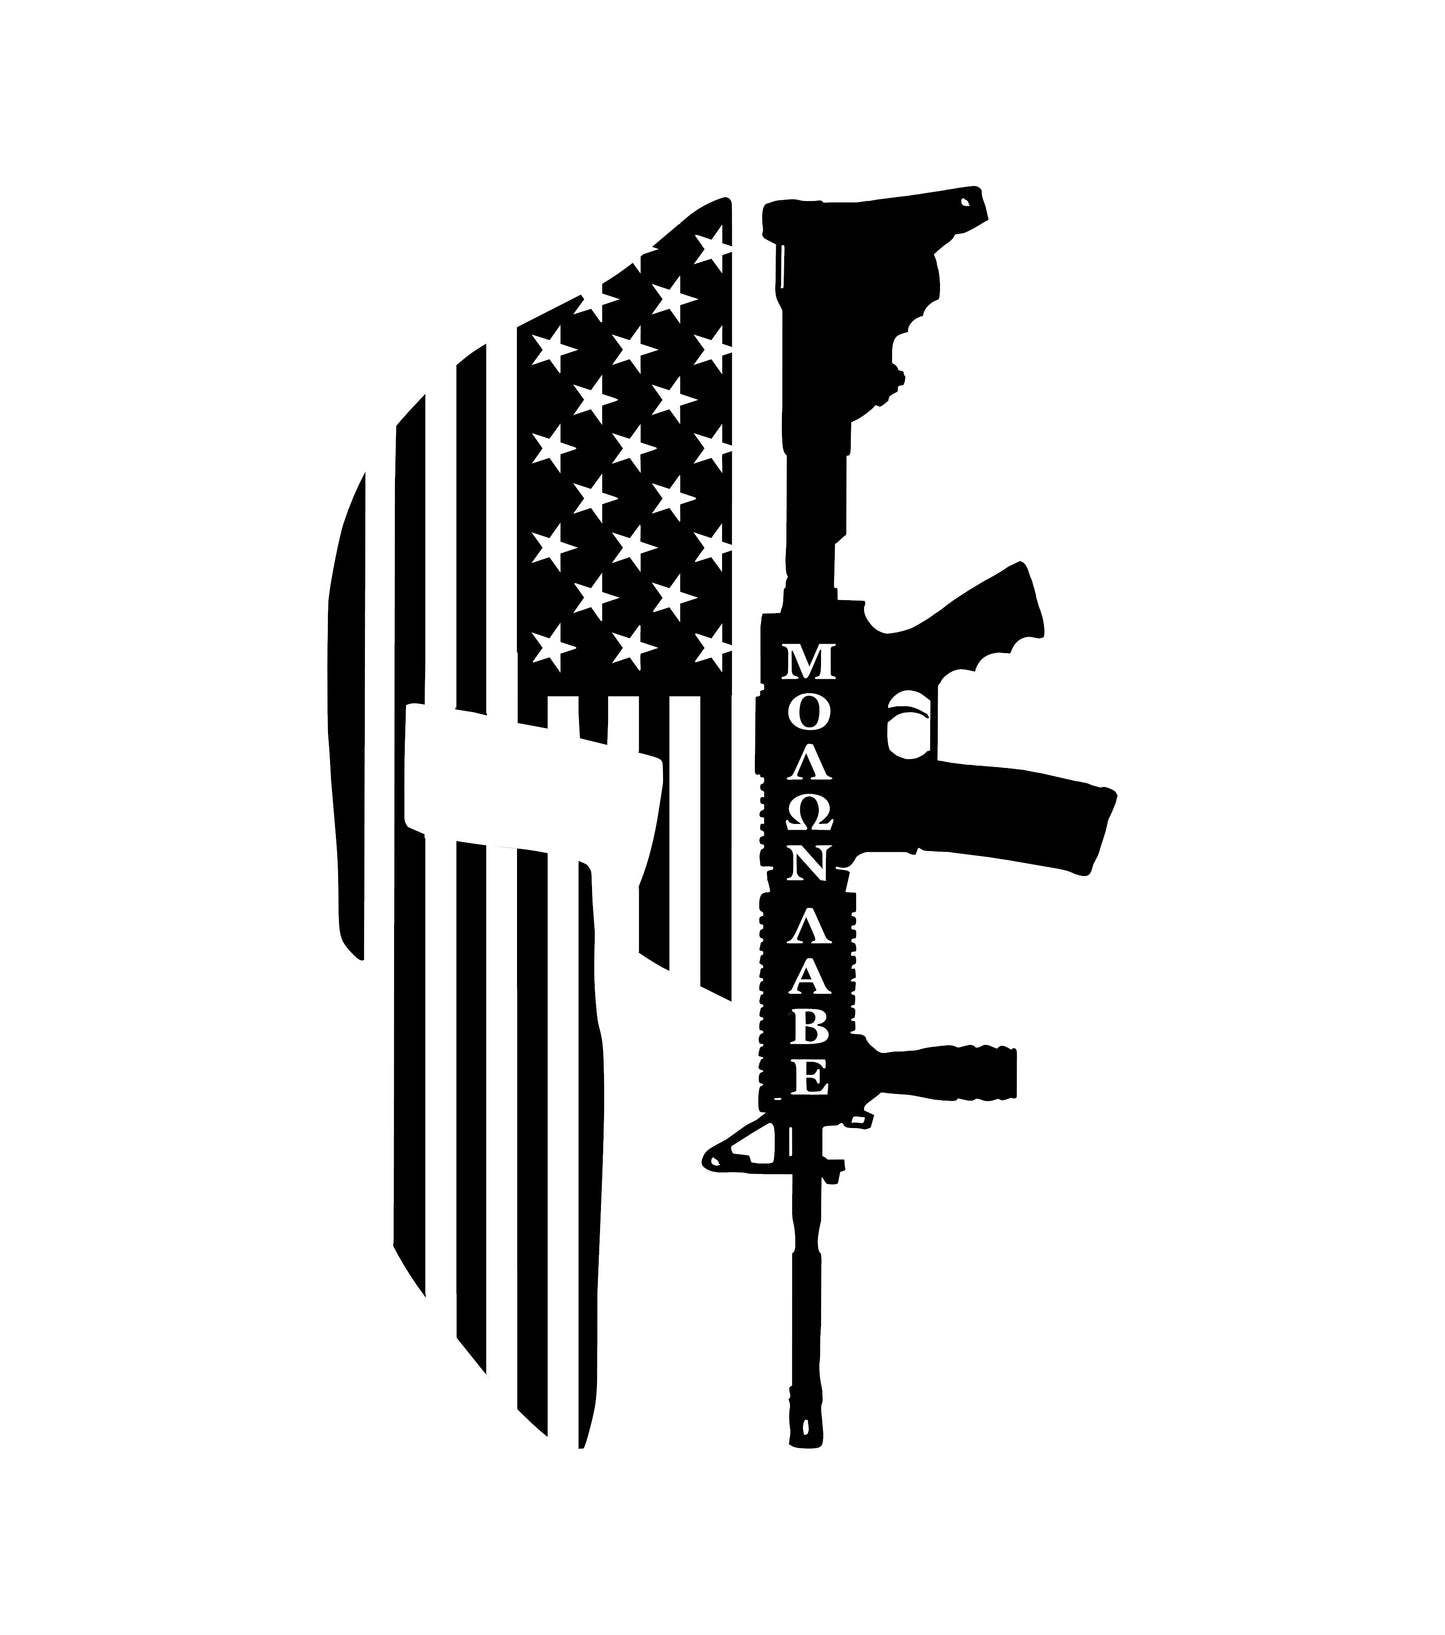 American Flag Decal Molon Labe "Come and Take Them" 2nd Amendment Rights AR Rifle Gladiator Helmet Vinyl Decal Stickers